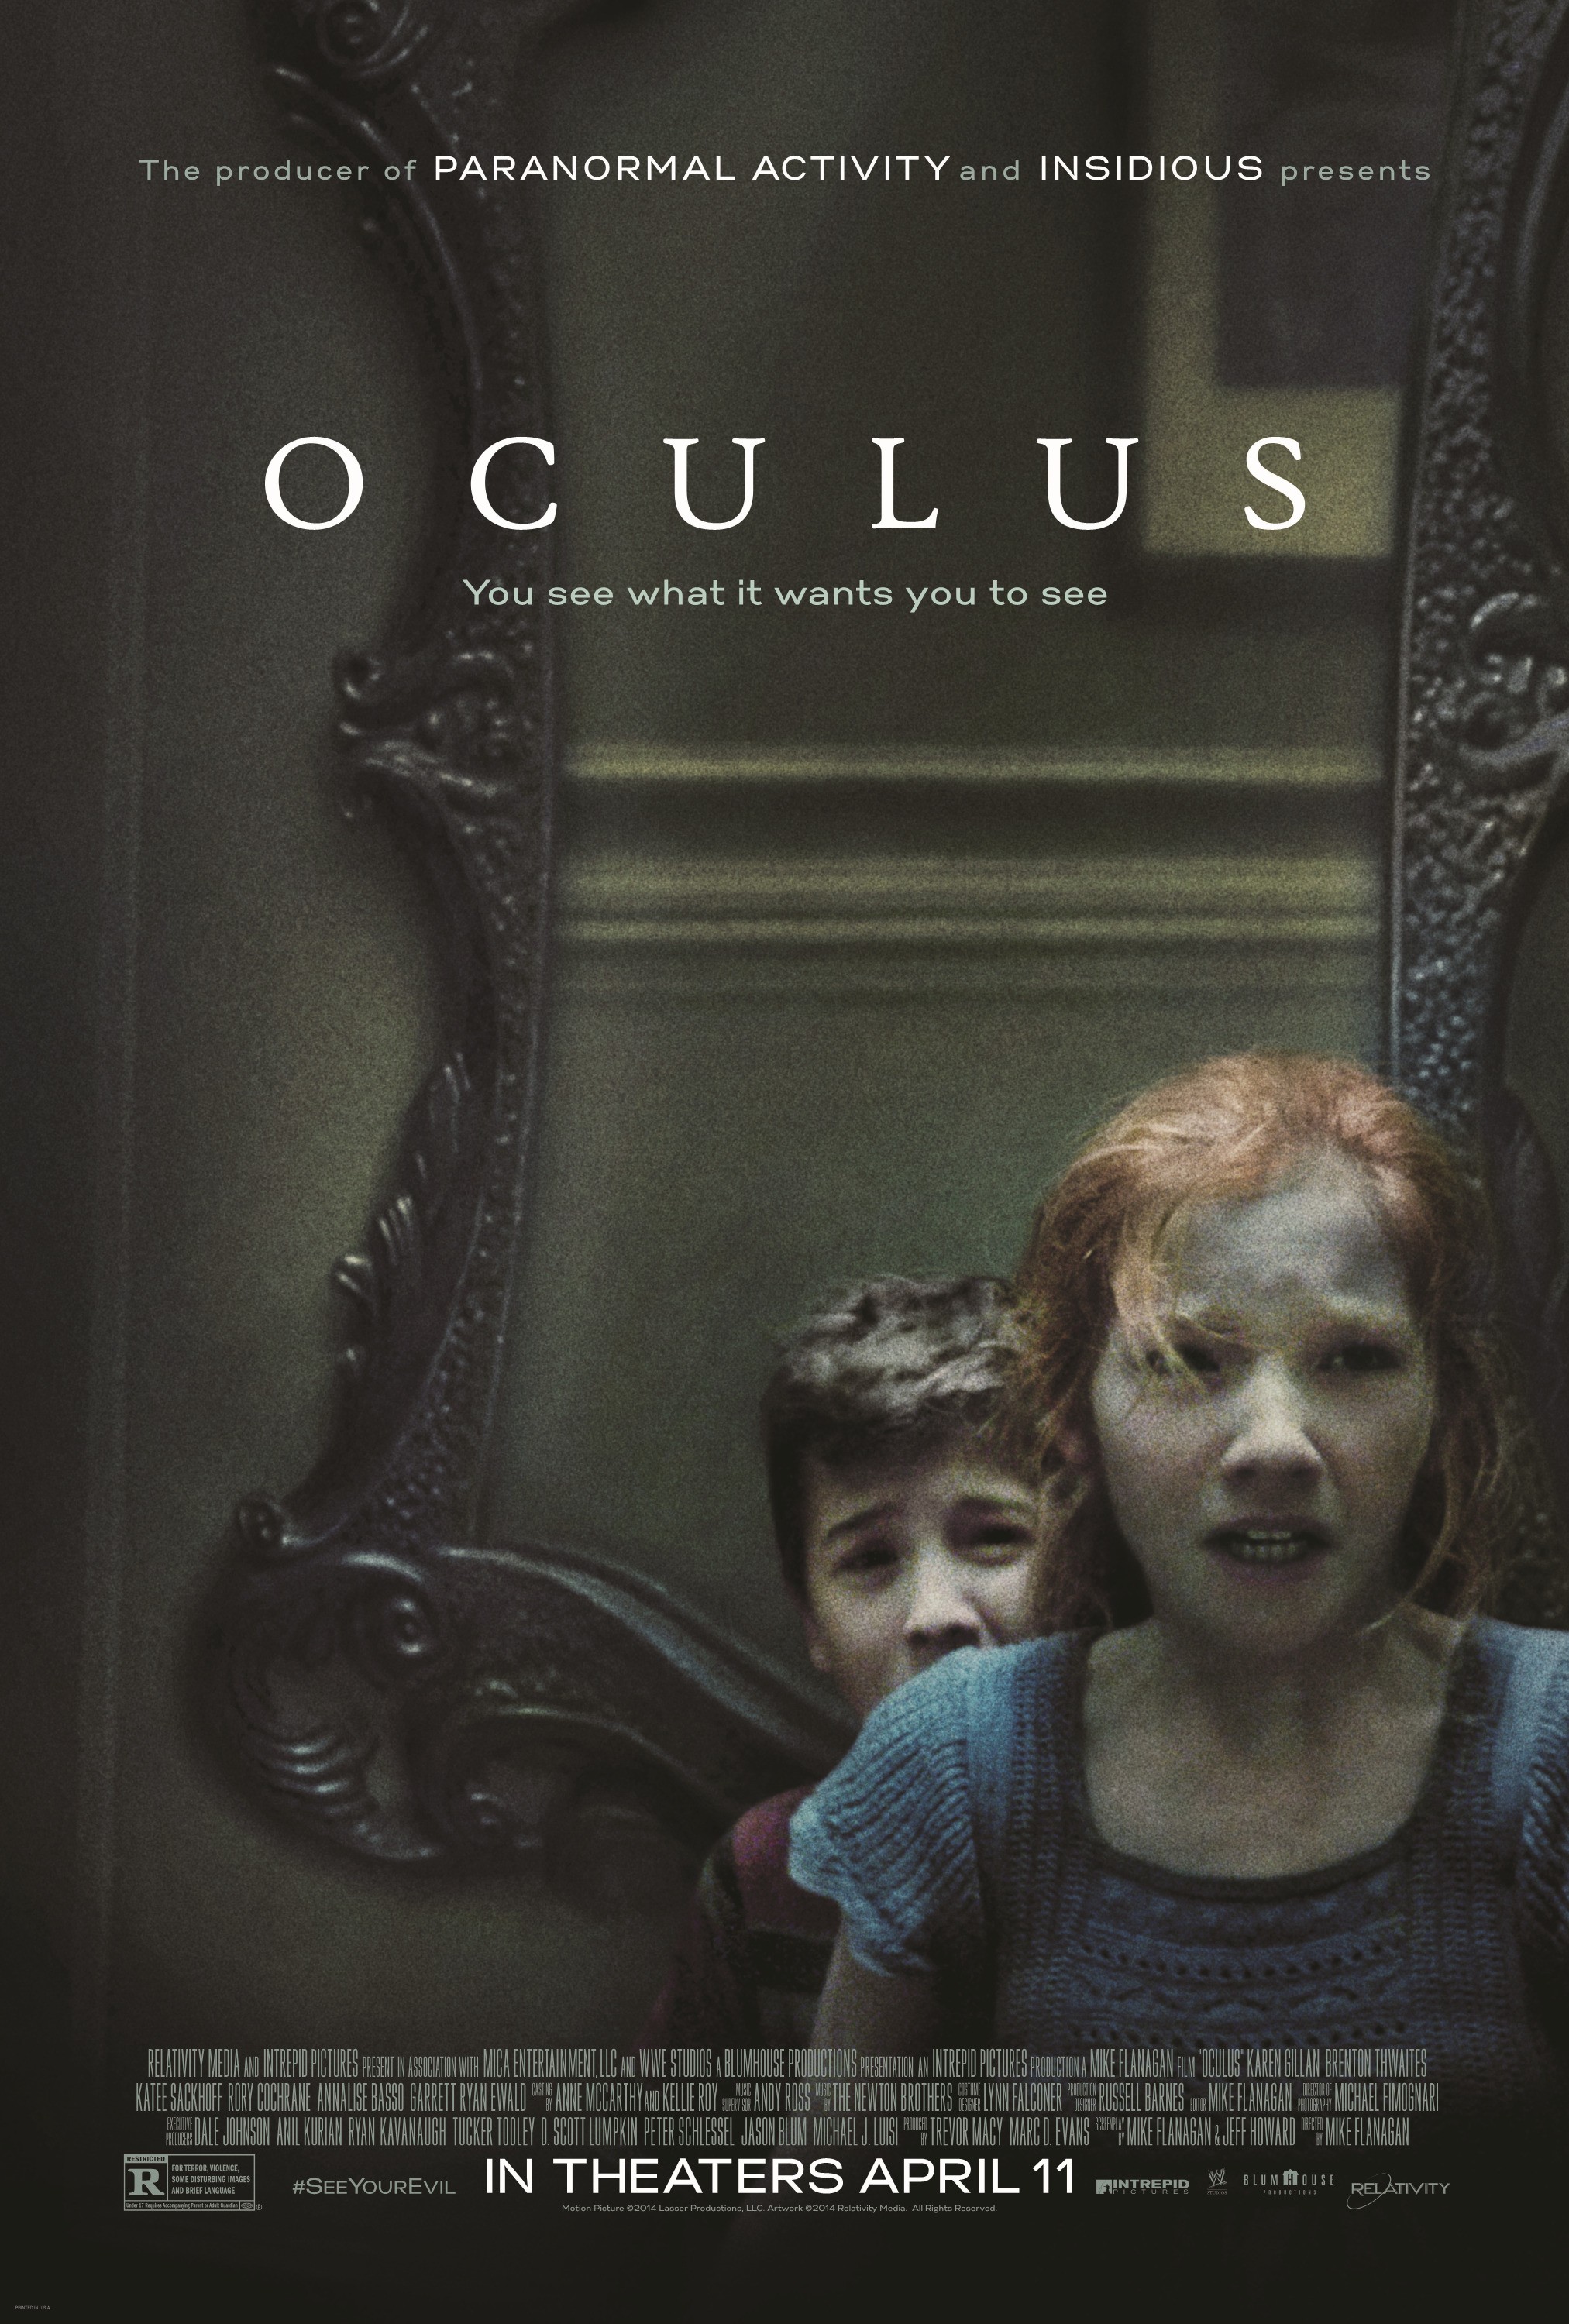 Oculus (2013): A Study in Perception and Dread